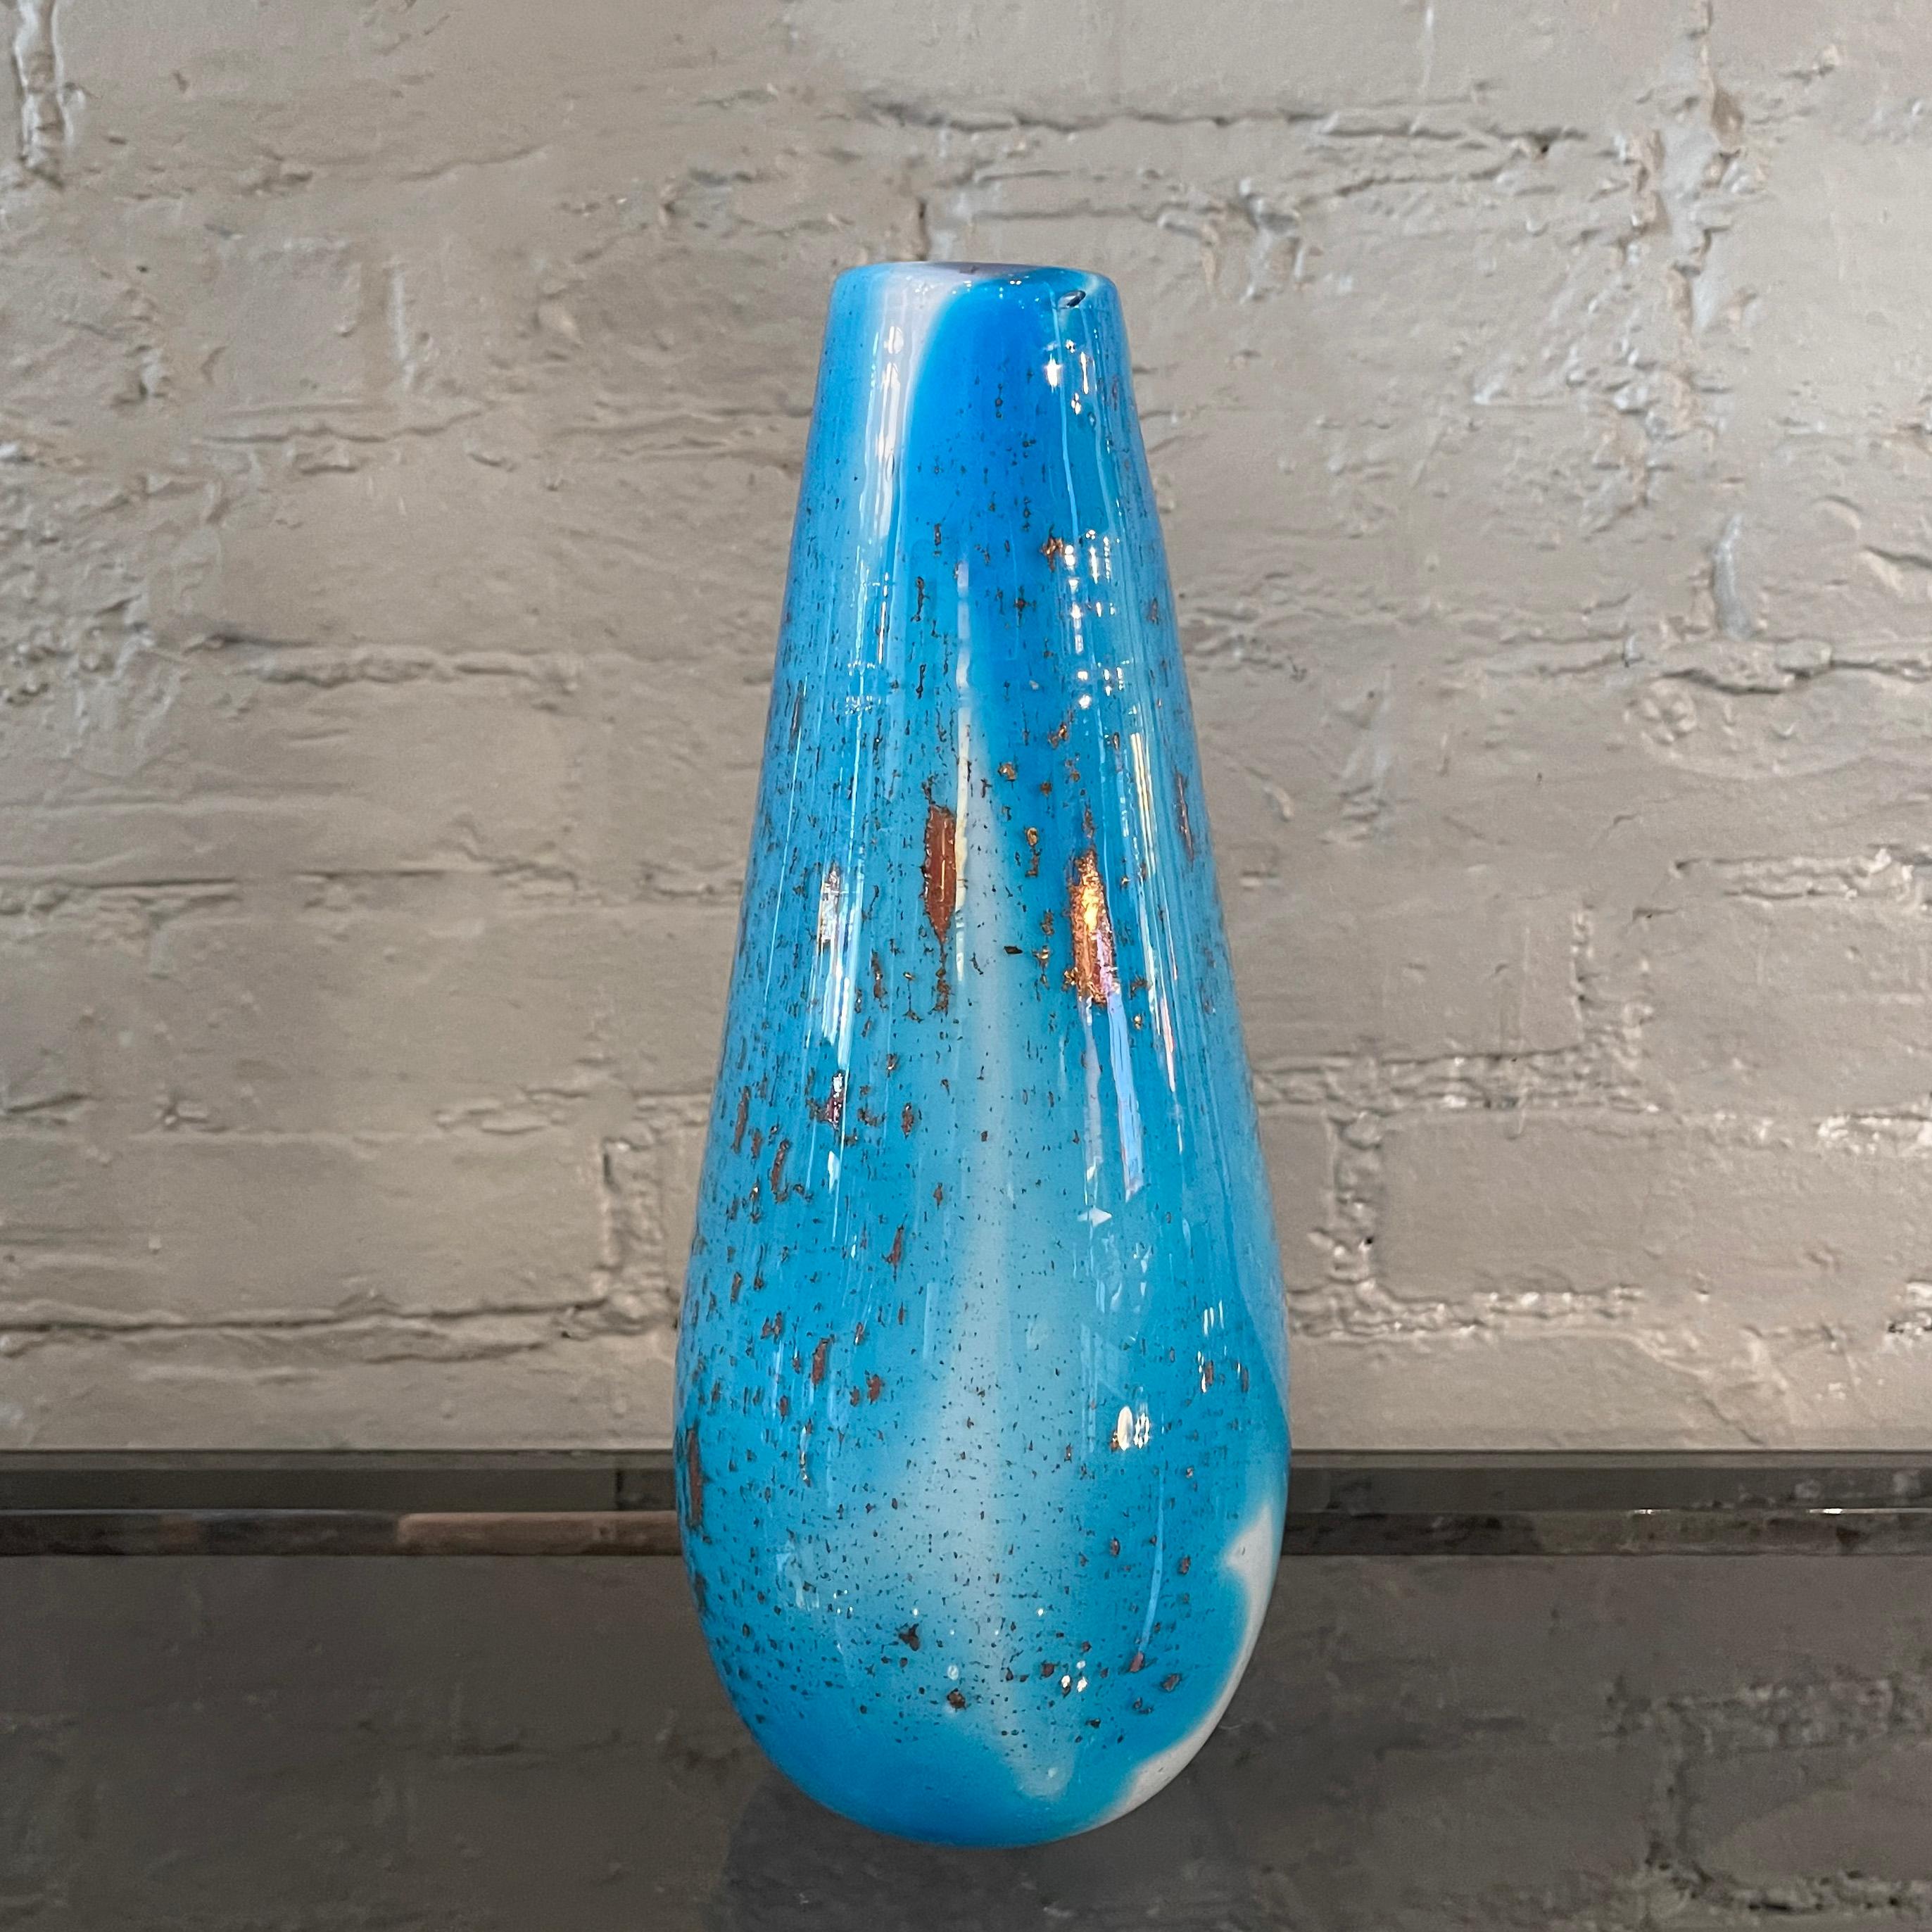 Mid century modern, slender, tear drop shaped, Murano art glass vase in gradient sky blue and white with gold flecks throughout.